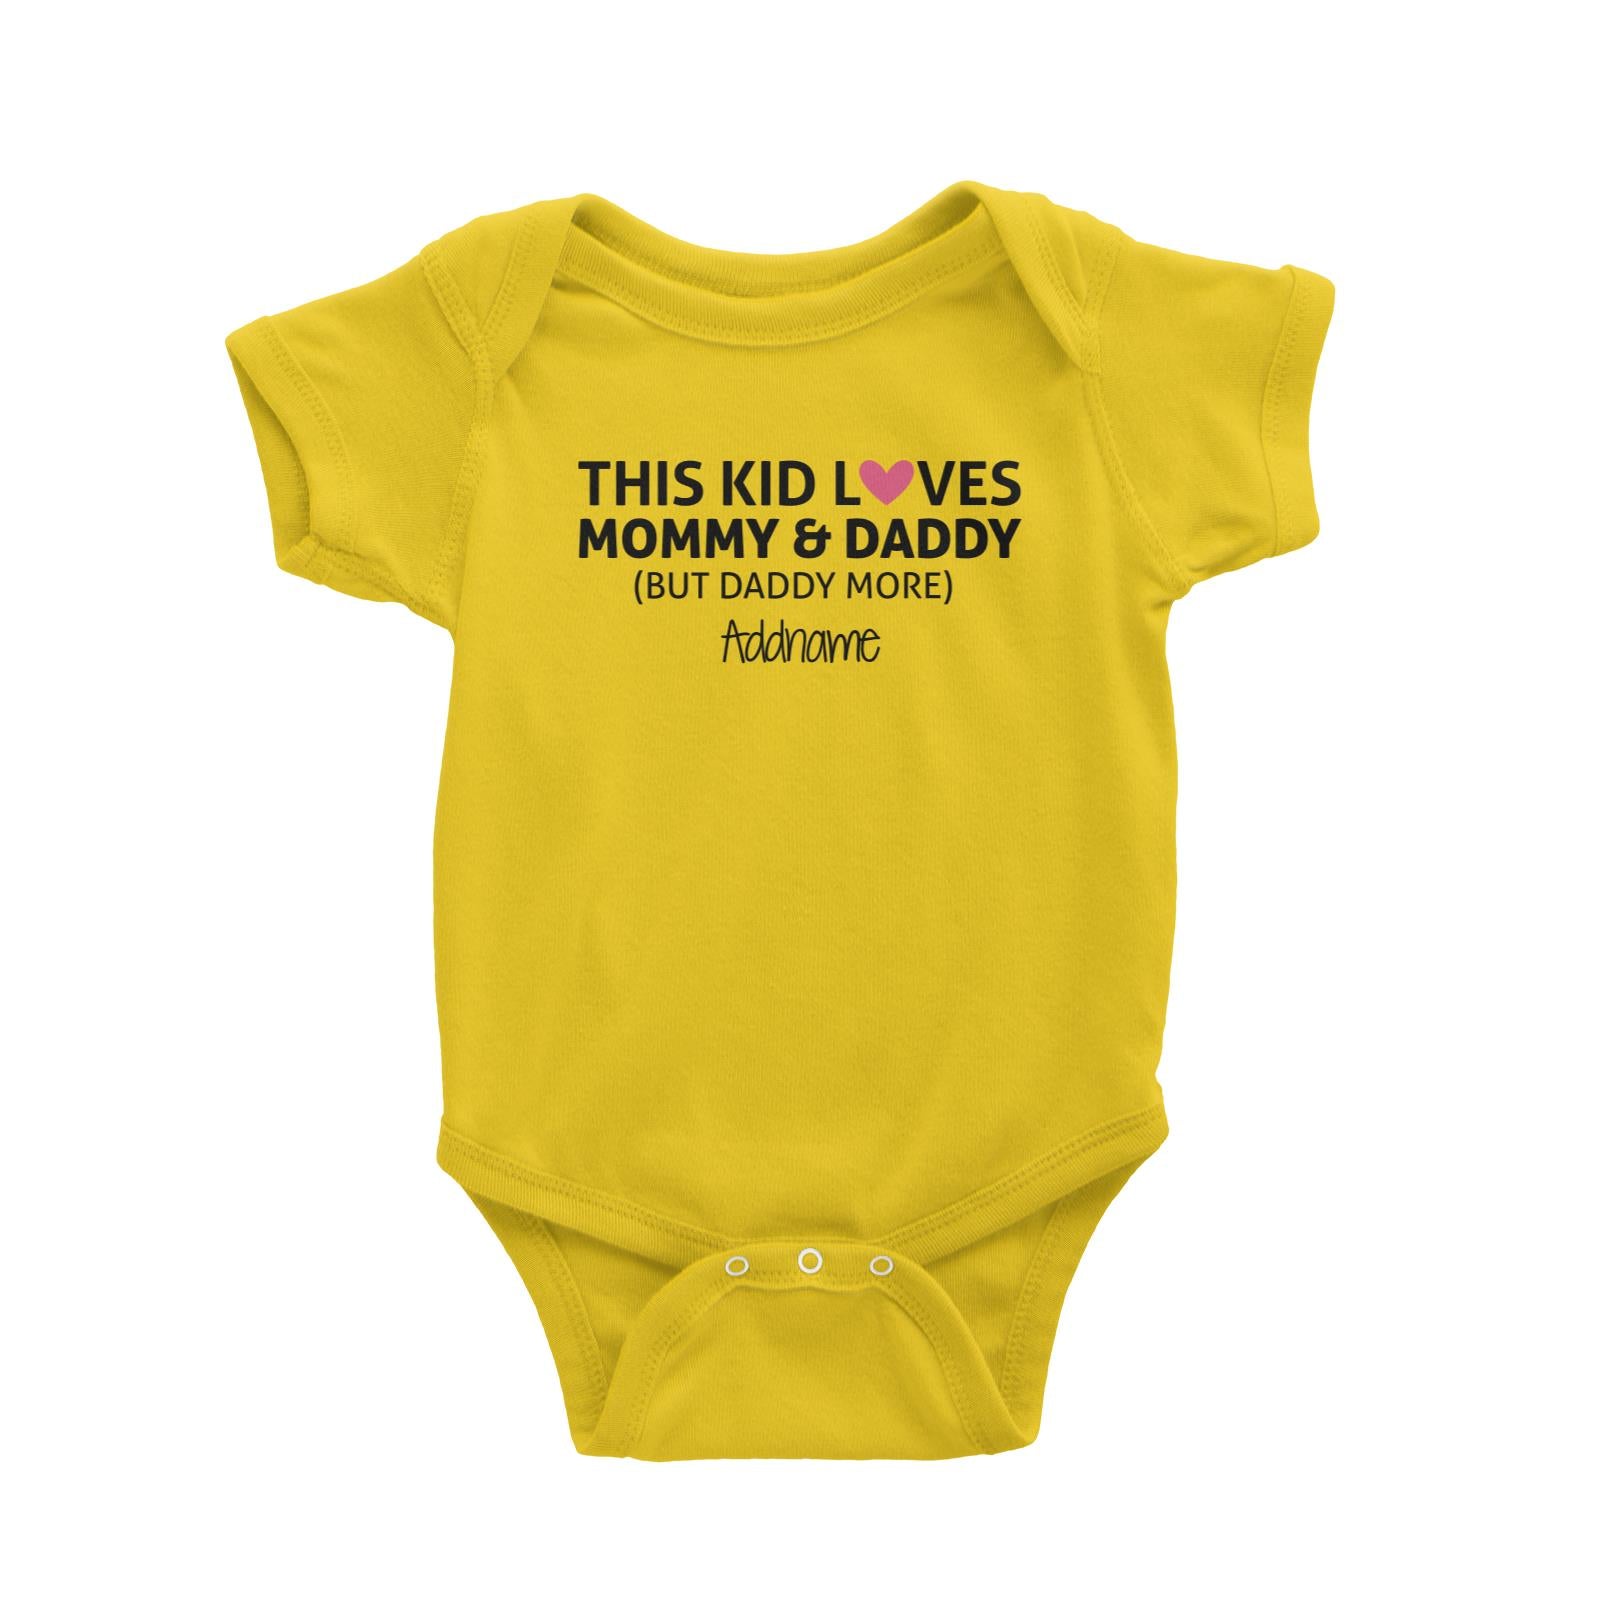 This Kid Loves Daddy More Addname Baby Romper